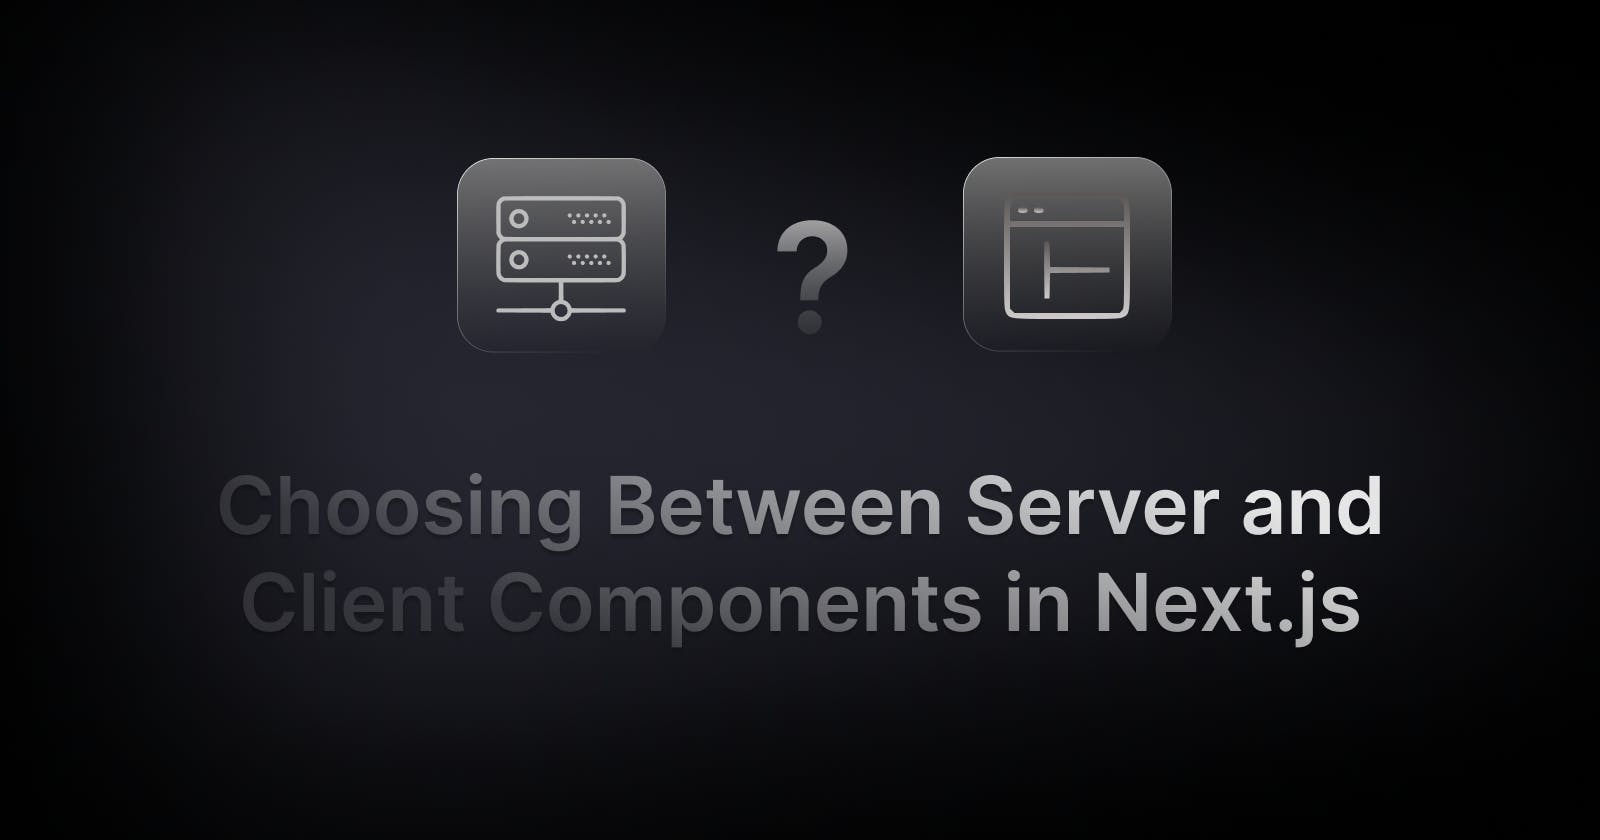 Choosing Between Server and Client Components in Next.js